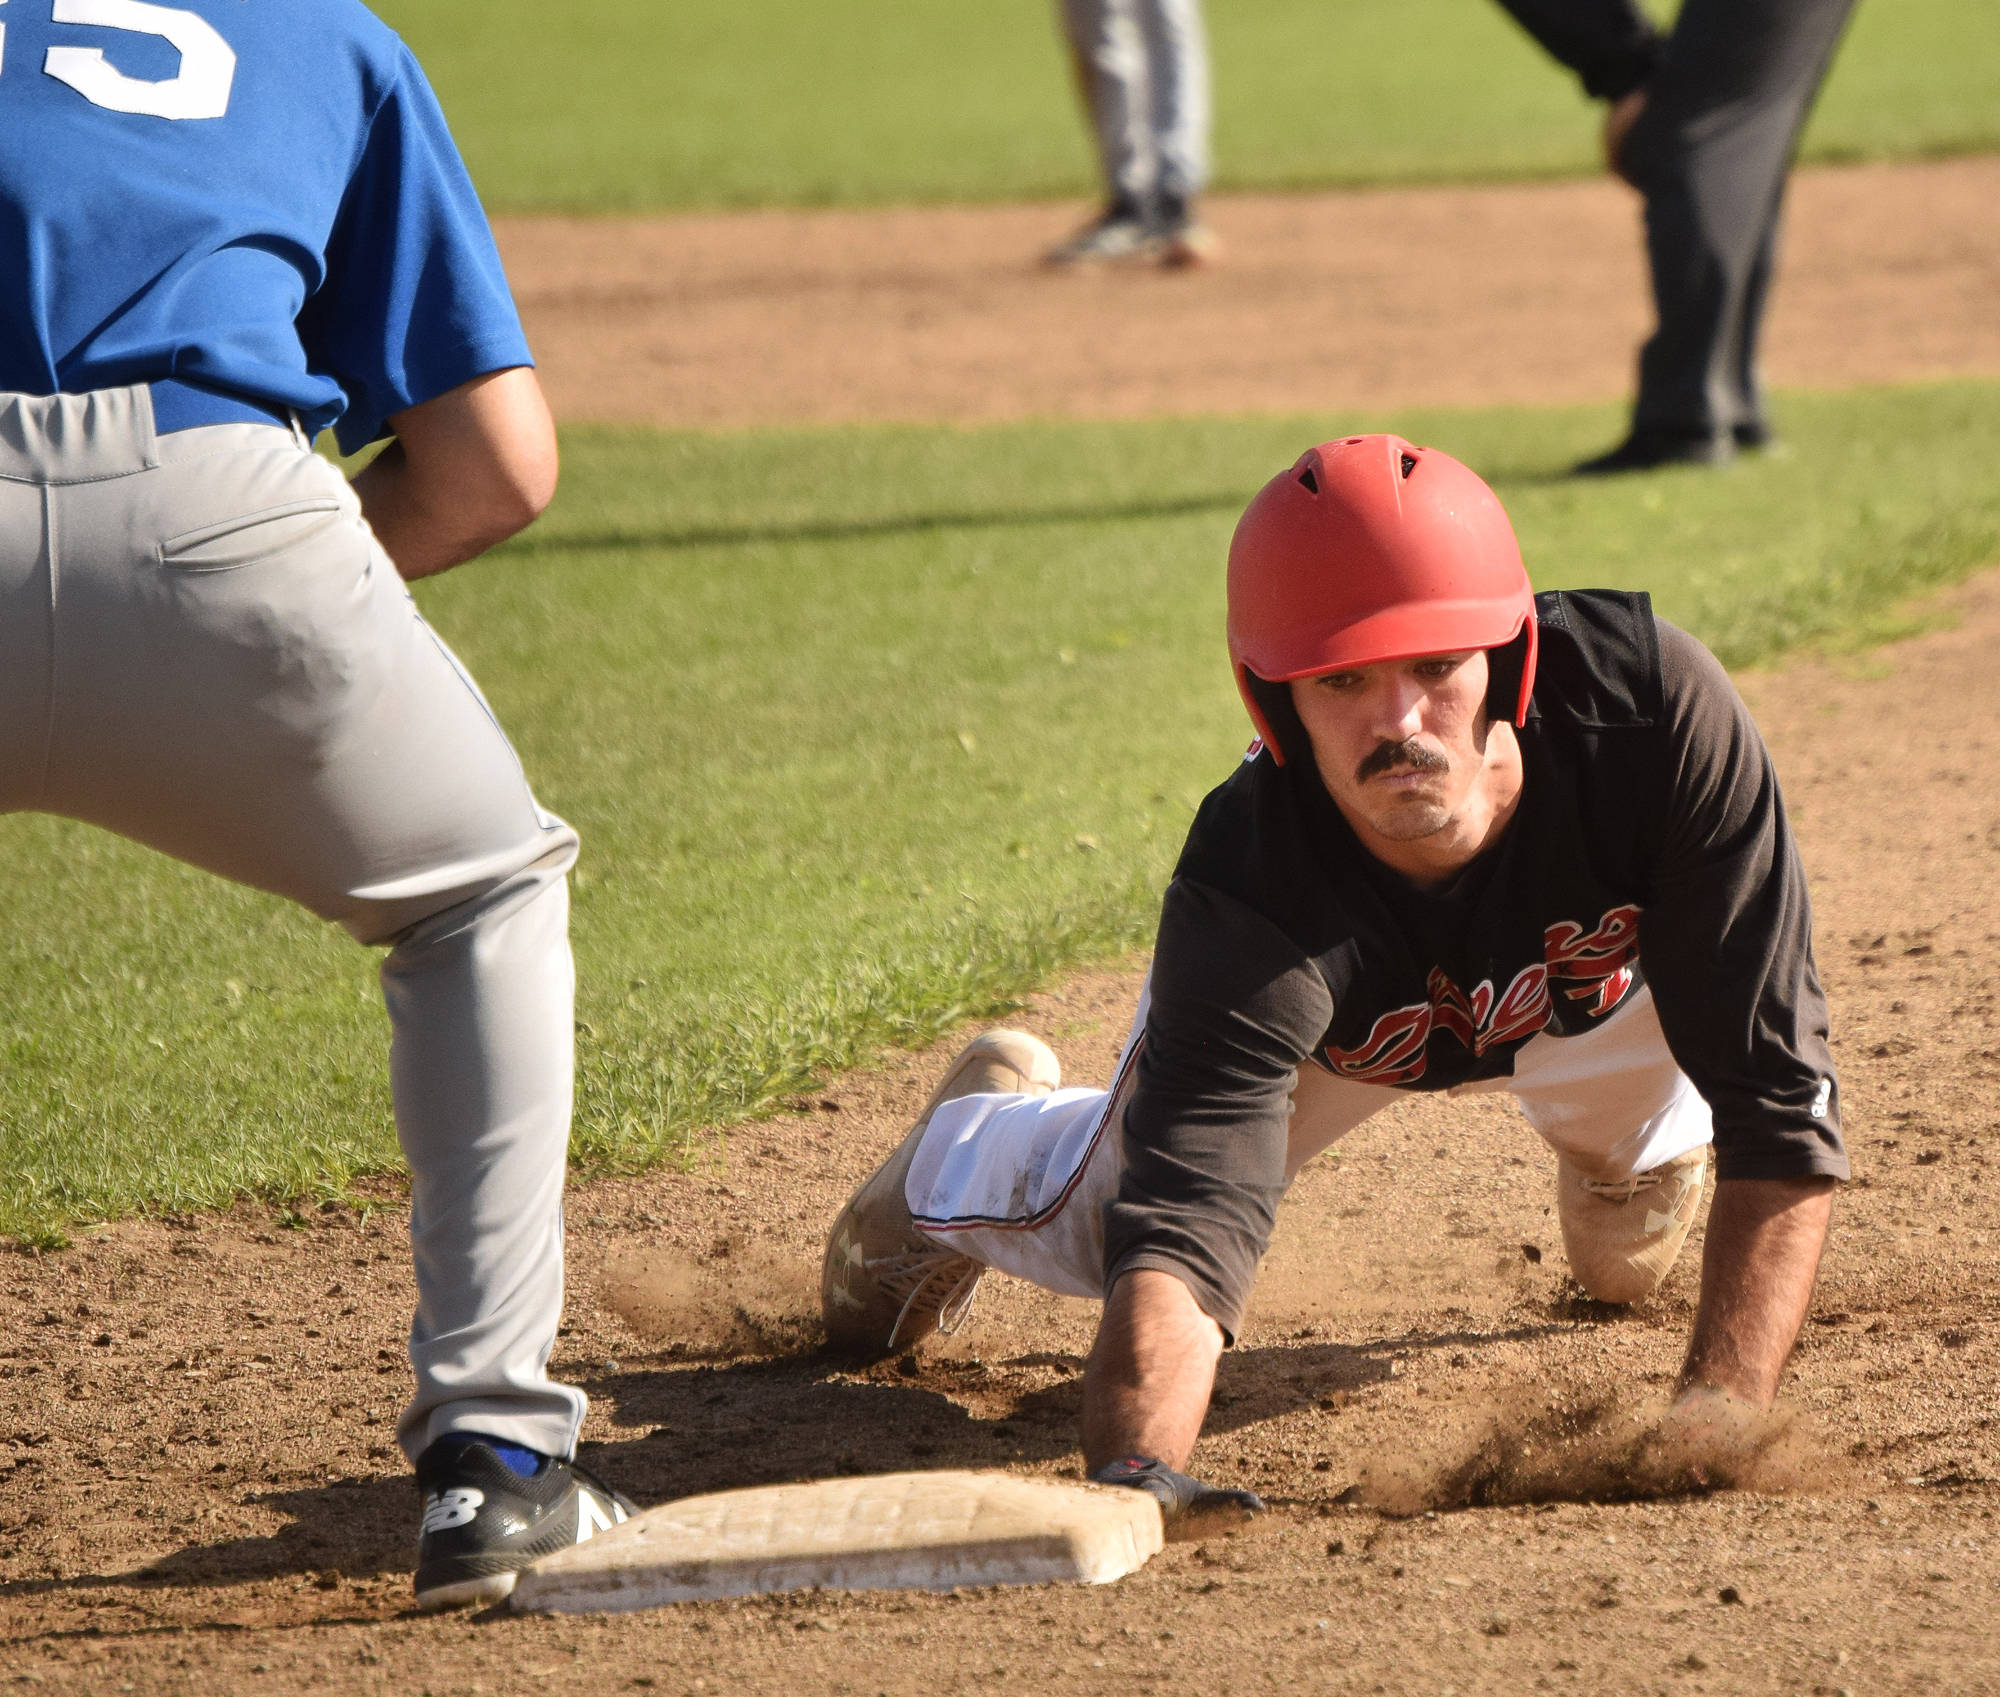 The Peninsula Oilers’ Ryan Novis touches first base just ahead of Anchorage Glacier Pilots first baseman Aaron McCann, Friday at Coral Seymour Memorial Park in Kenai. (Photo by Joey Klecka/Peninsula Clarion)